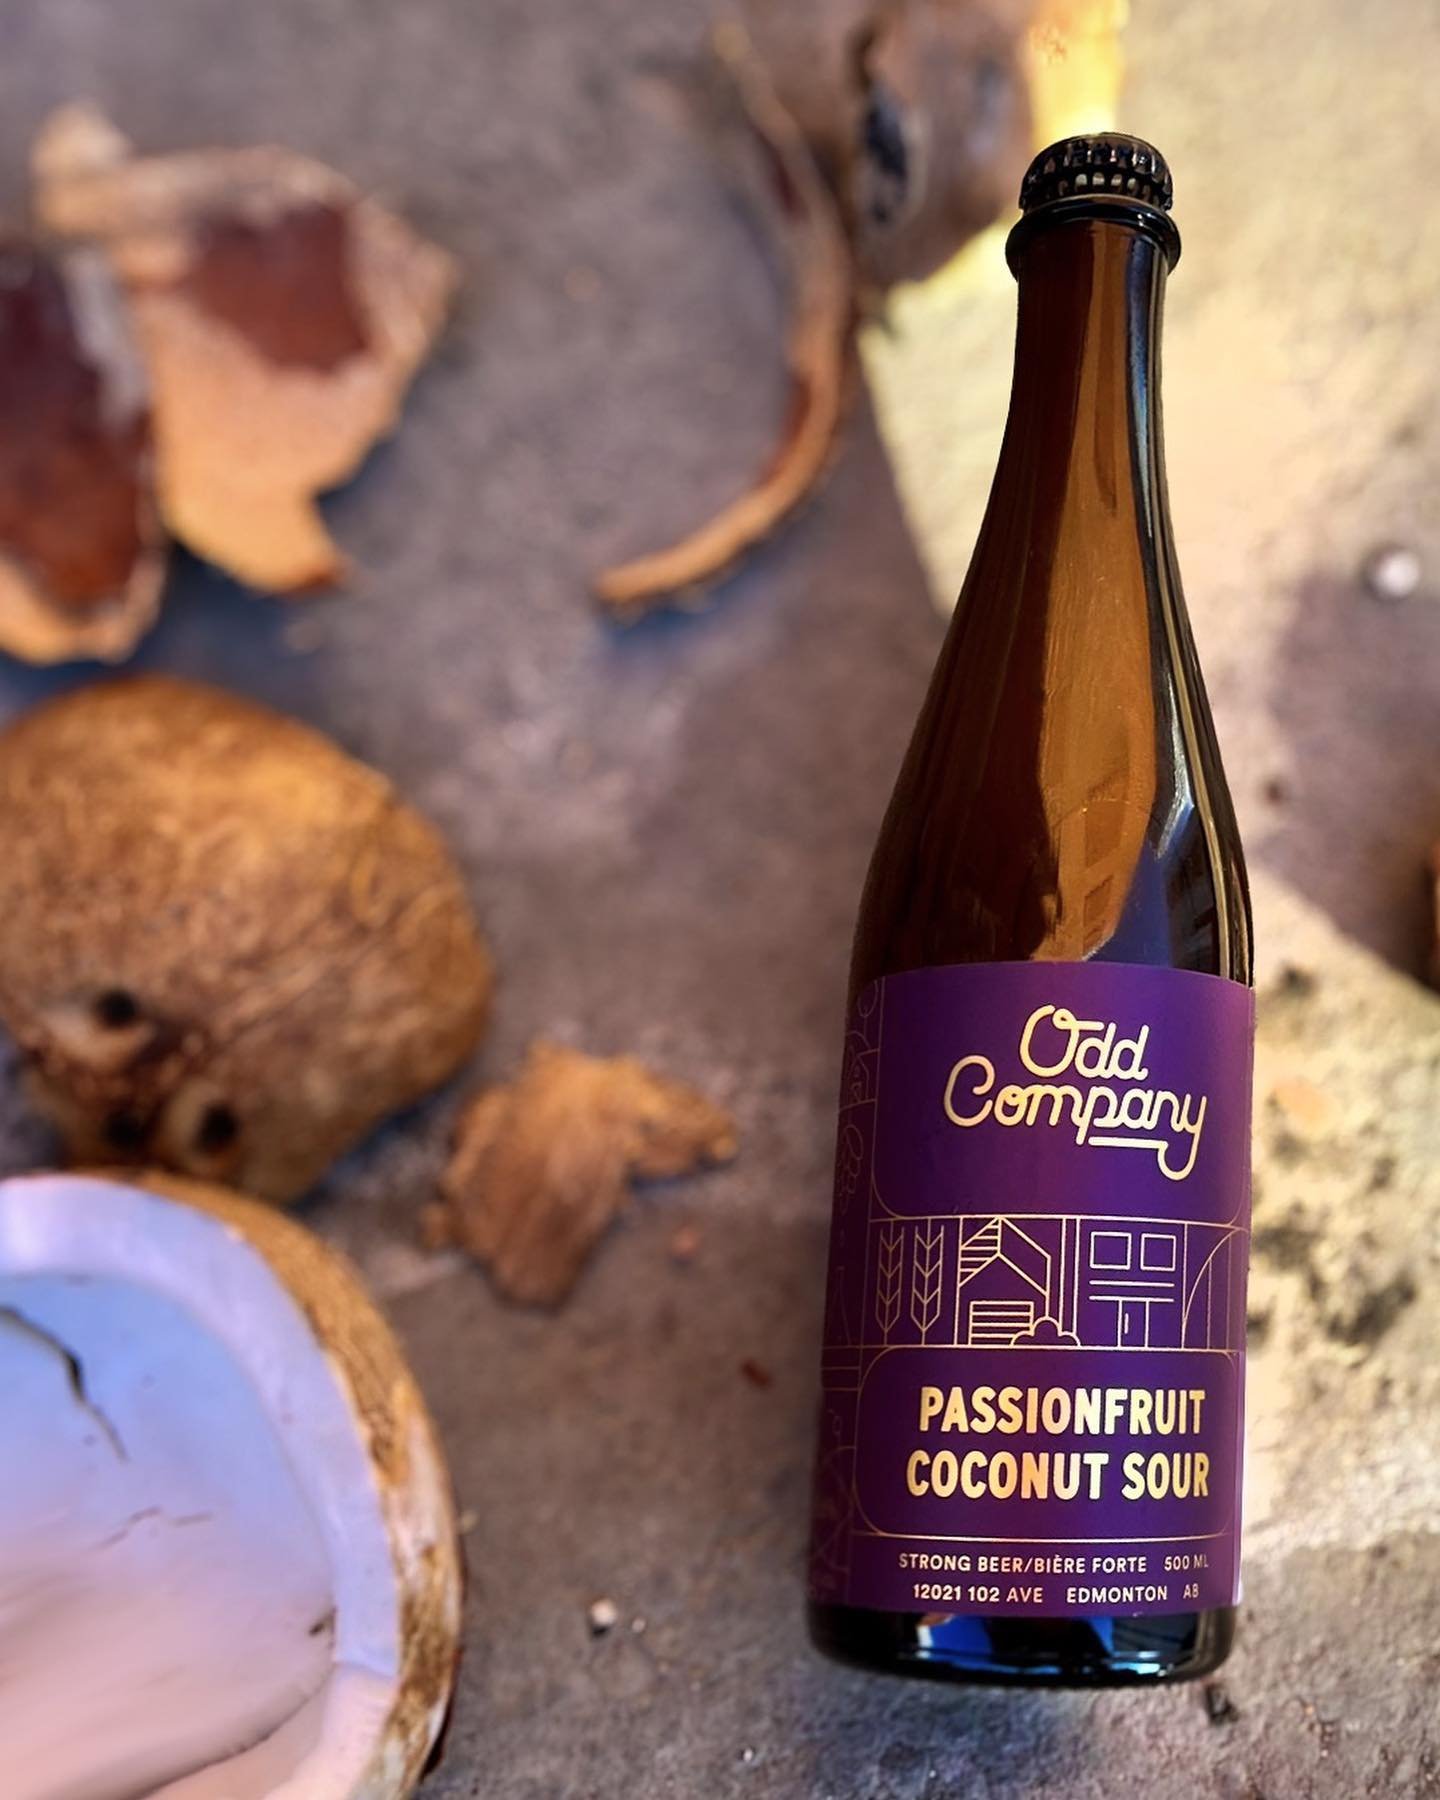 🍺🥥 Passionfruit Coconut Sour &bull; 5.6 ABV &bull; 250mL | 500mL | Howlers | Growlers | 500mL Bottles &bull;&nbsp;&nbsp;Both Locations 🥥🍺

Odd Company&rsquo;s Passionfruit Coconut Sour IS BACK for yet another season of refreshment! (We know you&r